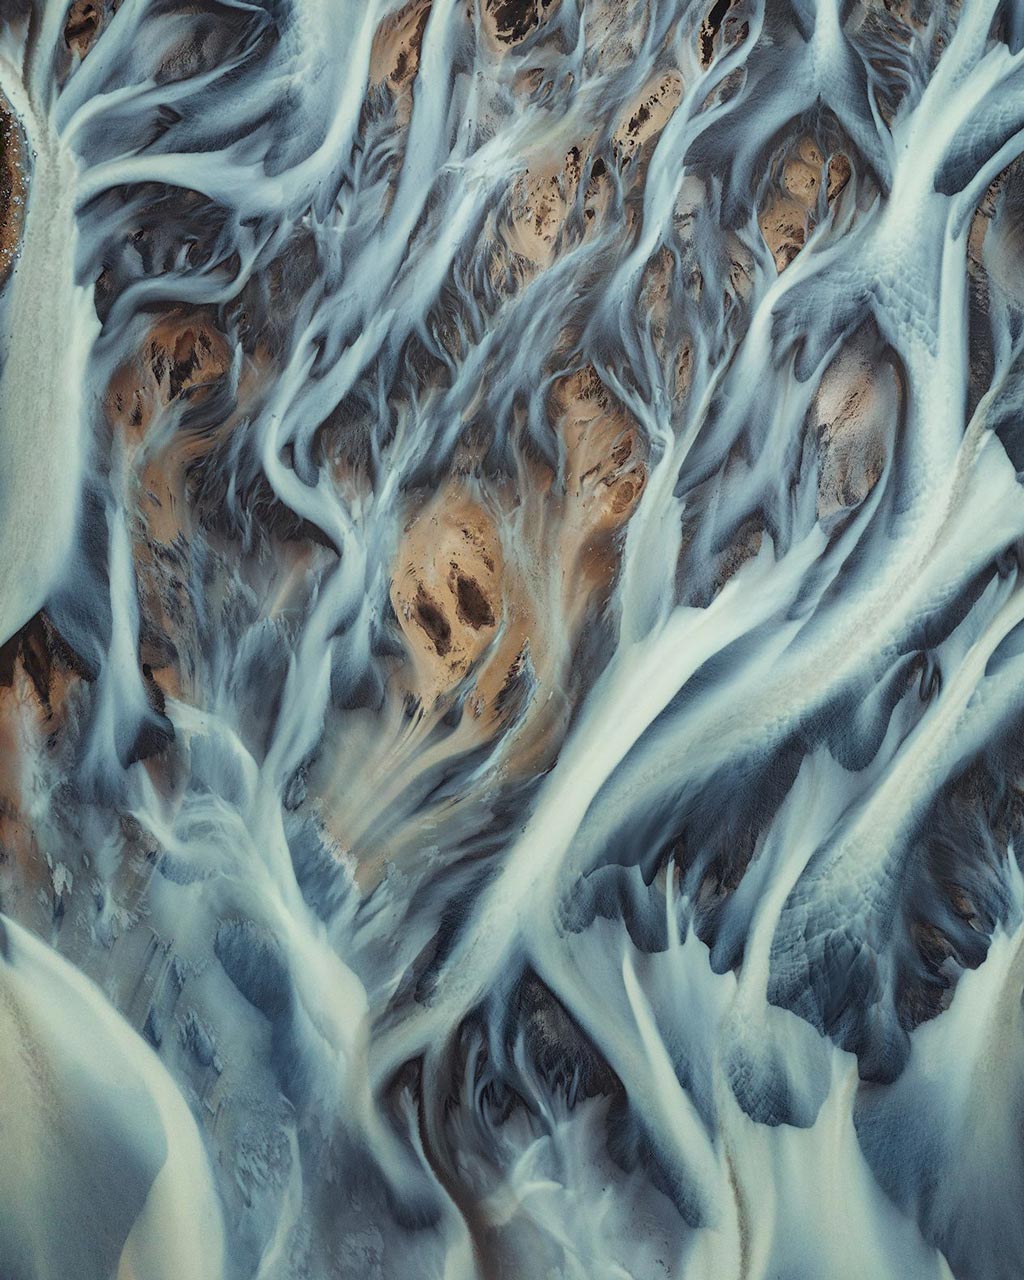 Braided Glacial Rivers